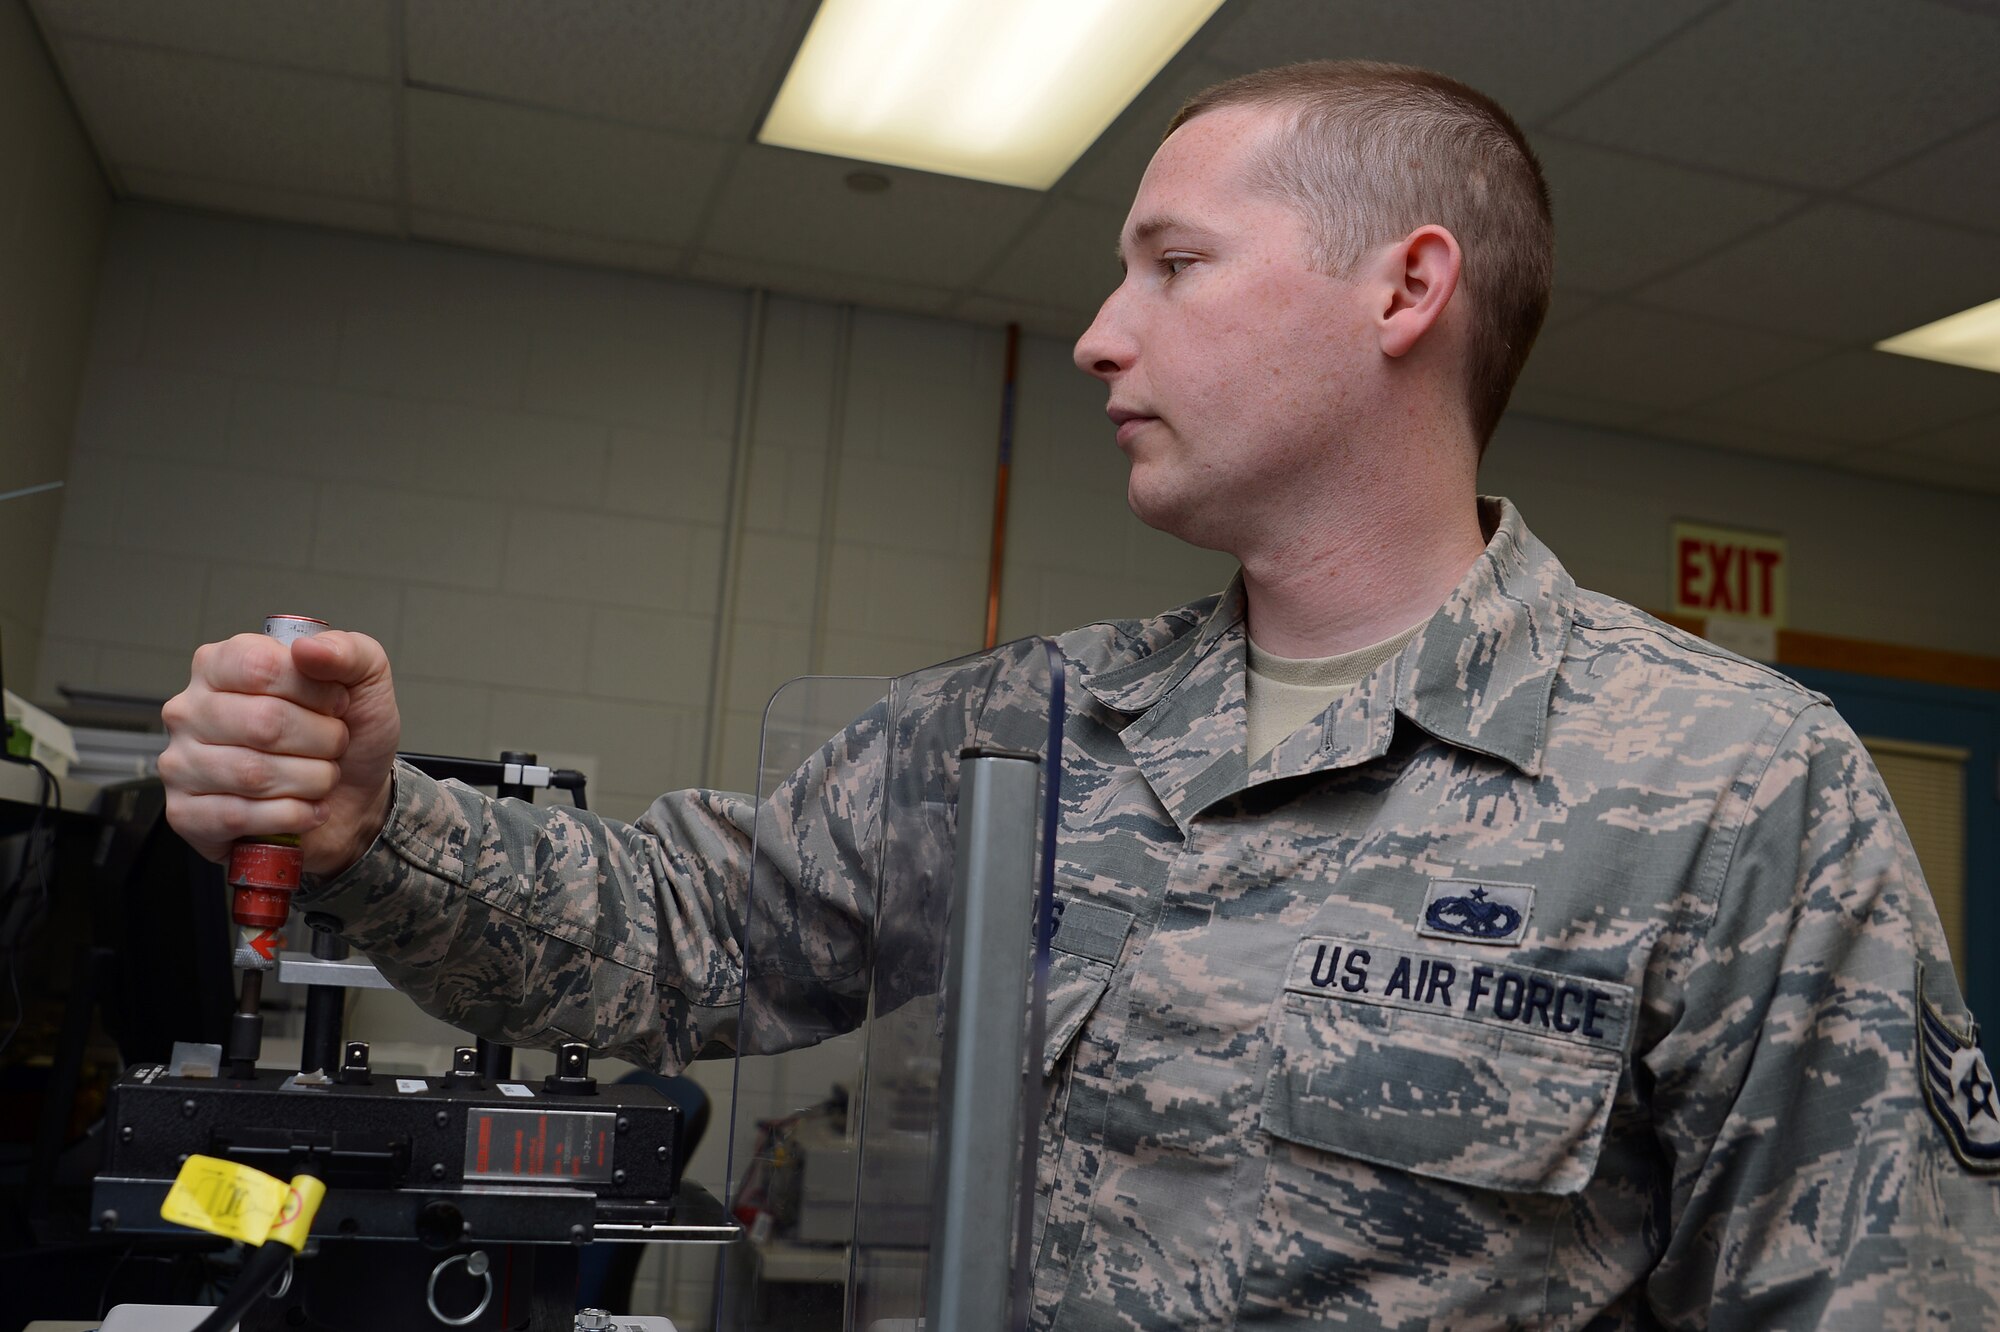 Staff Sgt. Jacob Burns, 62nd Maintenance Squadron precision measurement equipment laboratory supervisor, calibrates a torque wrench June 7, 2016 at Joint Base Lewis-McChord, Wash. The PMEL shop is responsible for calibrating equipment that is used in virtually every phase of maintenance on McChord Field and throughout numerous government organizations in the Pacific Northwest. (U.S. Air Force photo/Senior Airman Jacob Jimenez)  